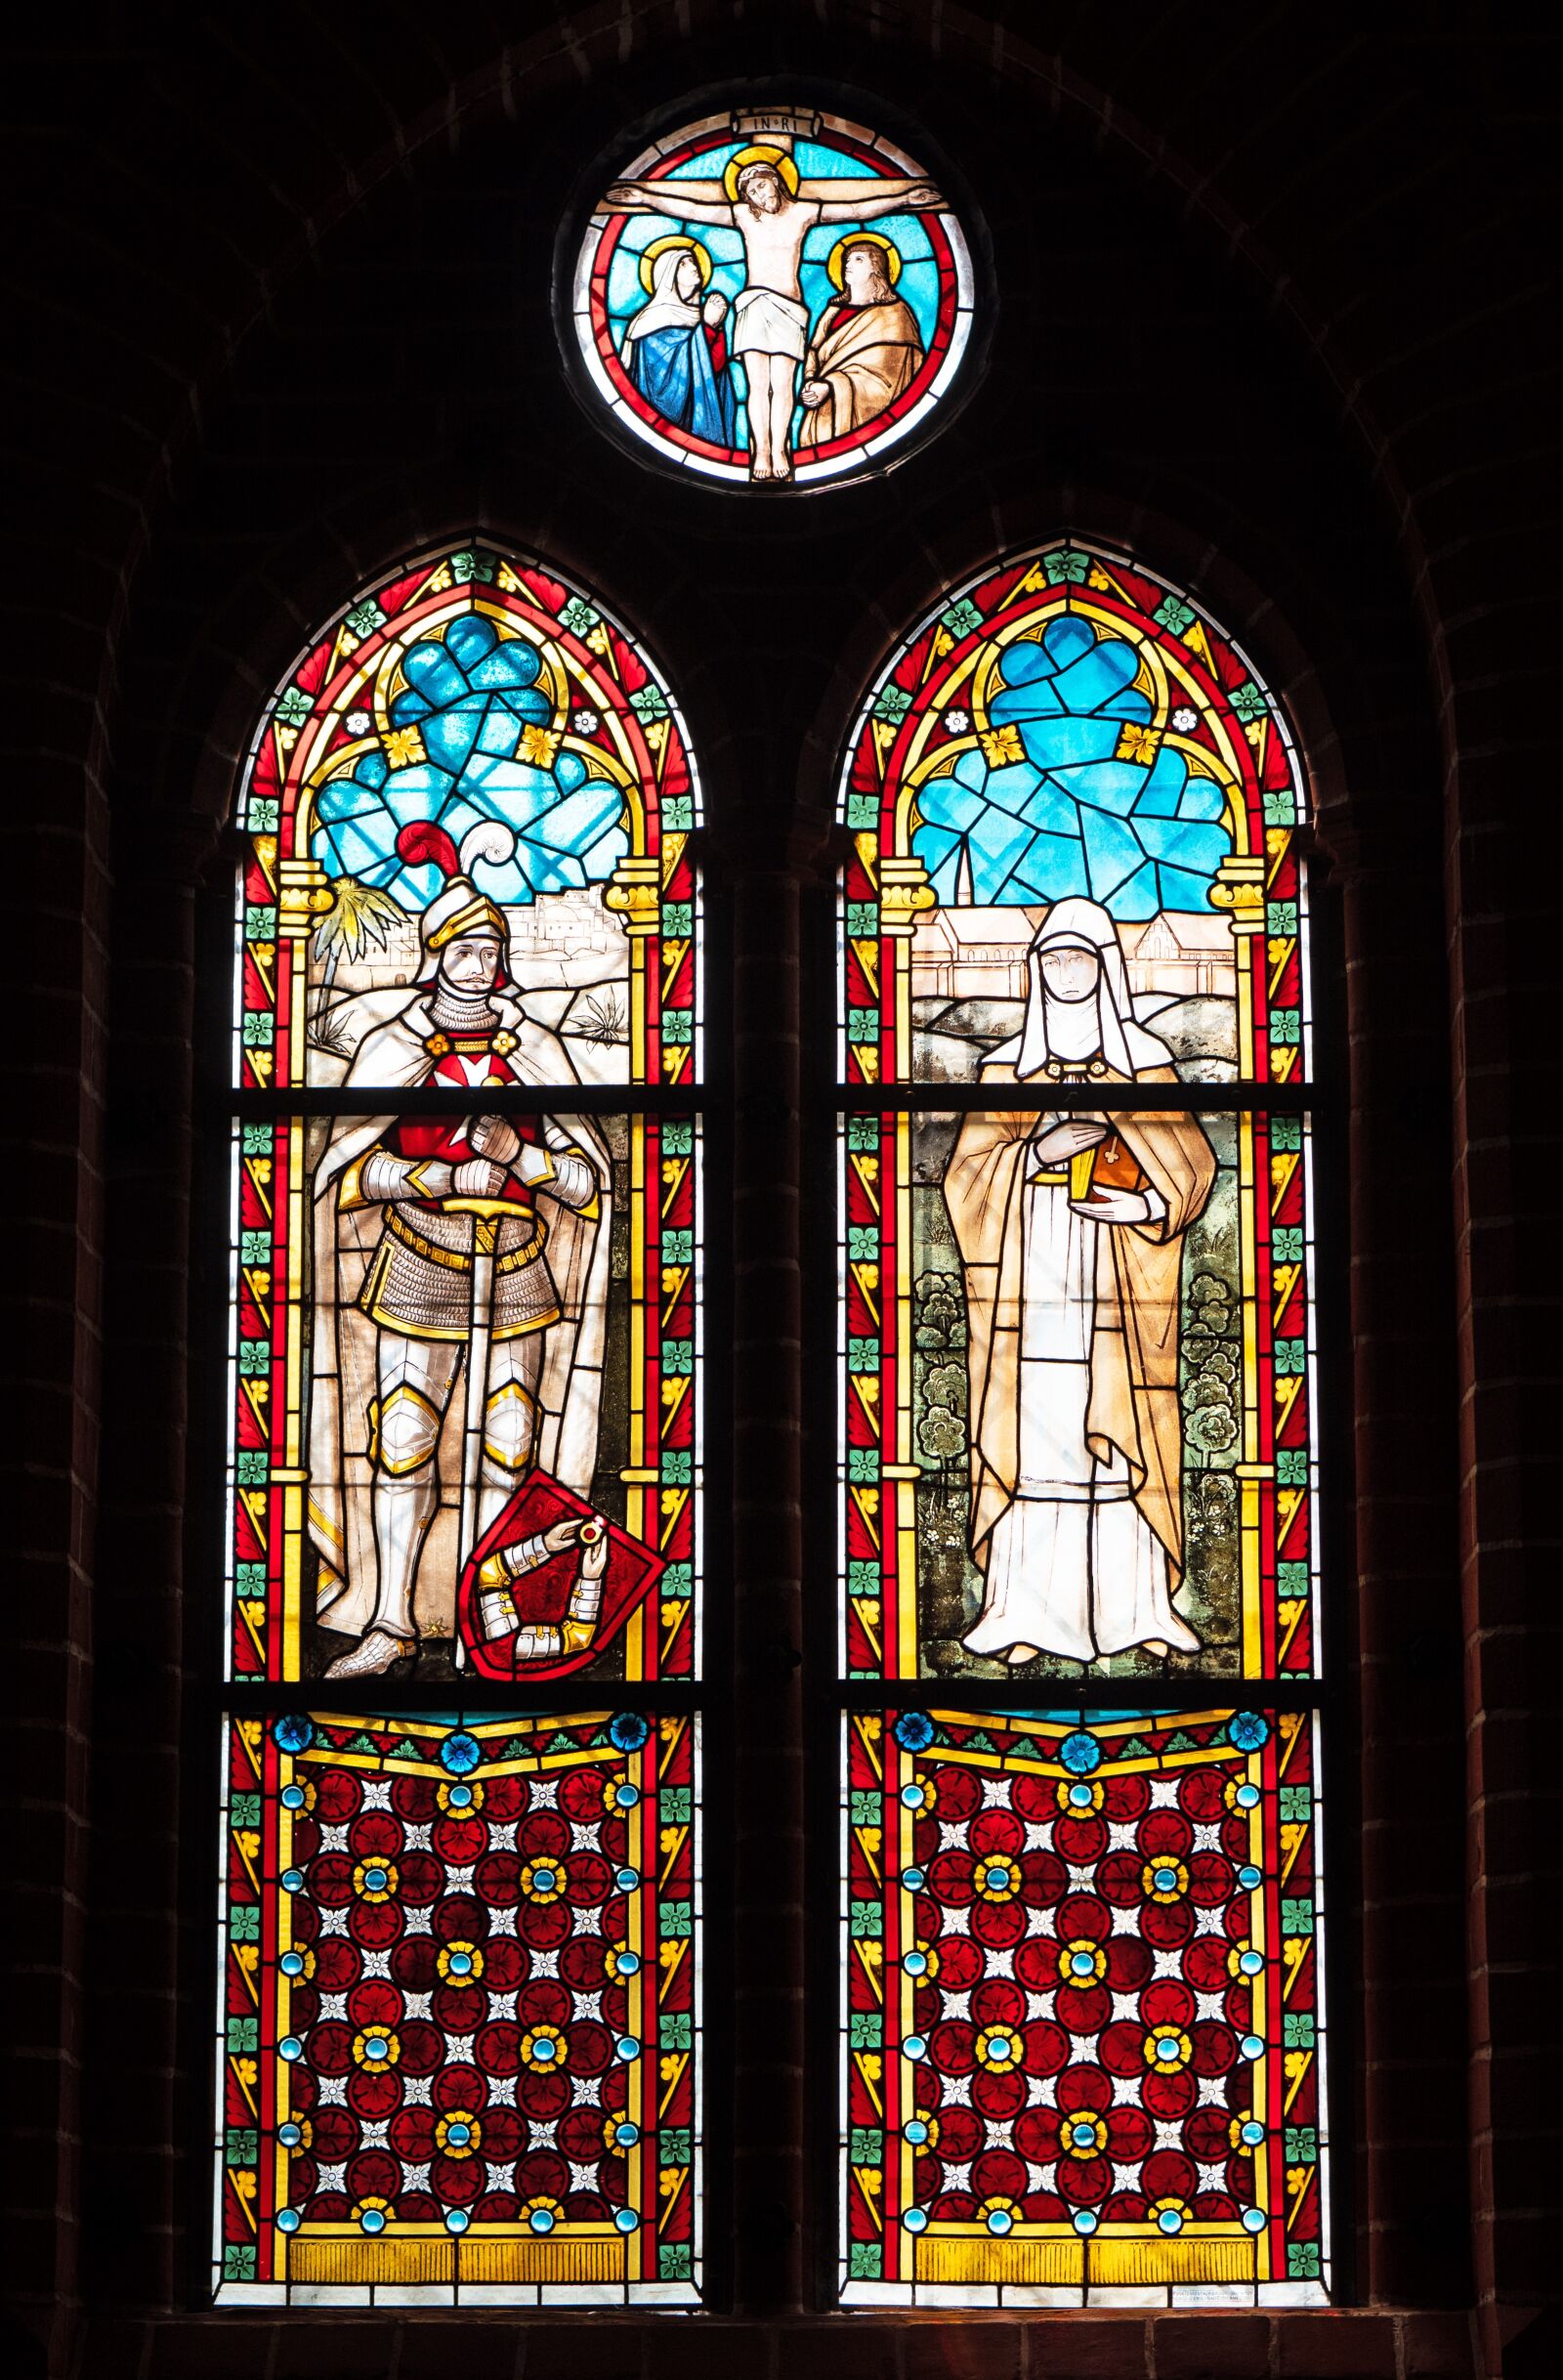 Panasonic Leica DG Nocticron 42.5mm F1.2 ASPH OIS sample photo. Church window, stained glass photography